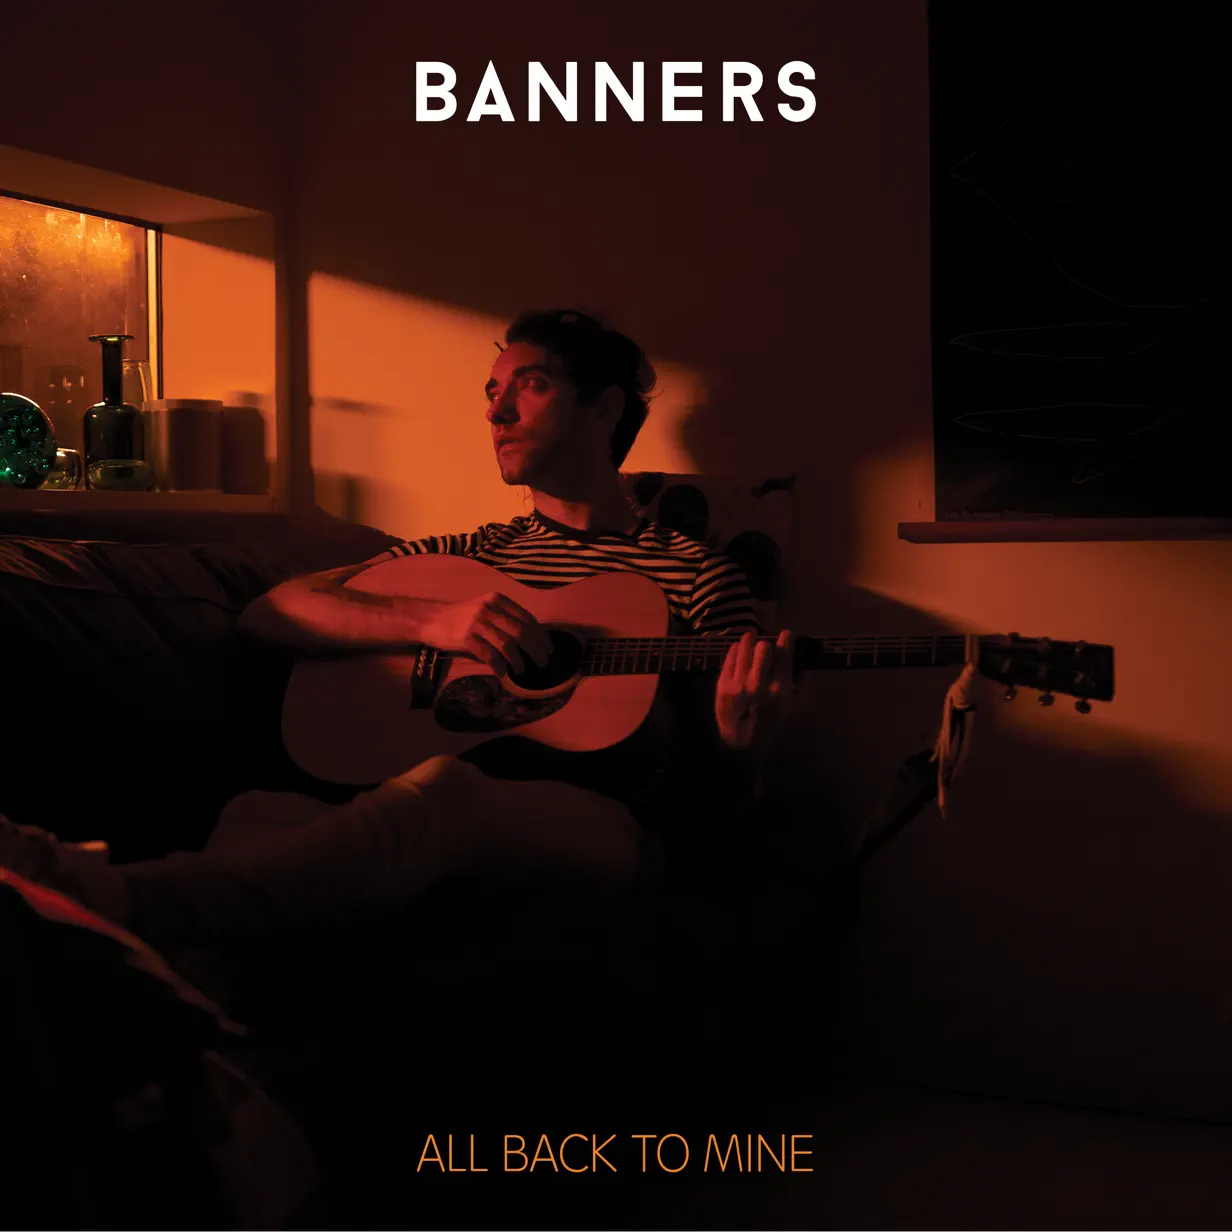 BANNERS’ “All Back to Mine” Album Download ZIP MP3 Files